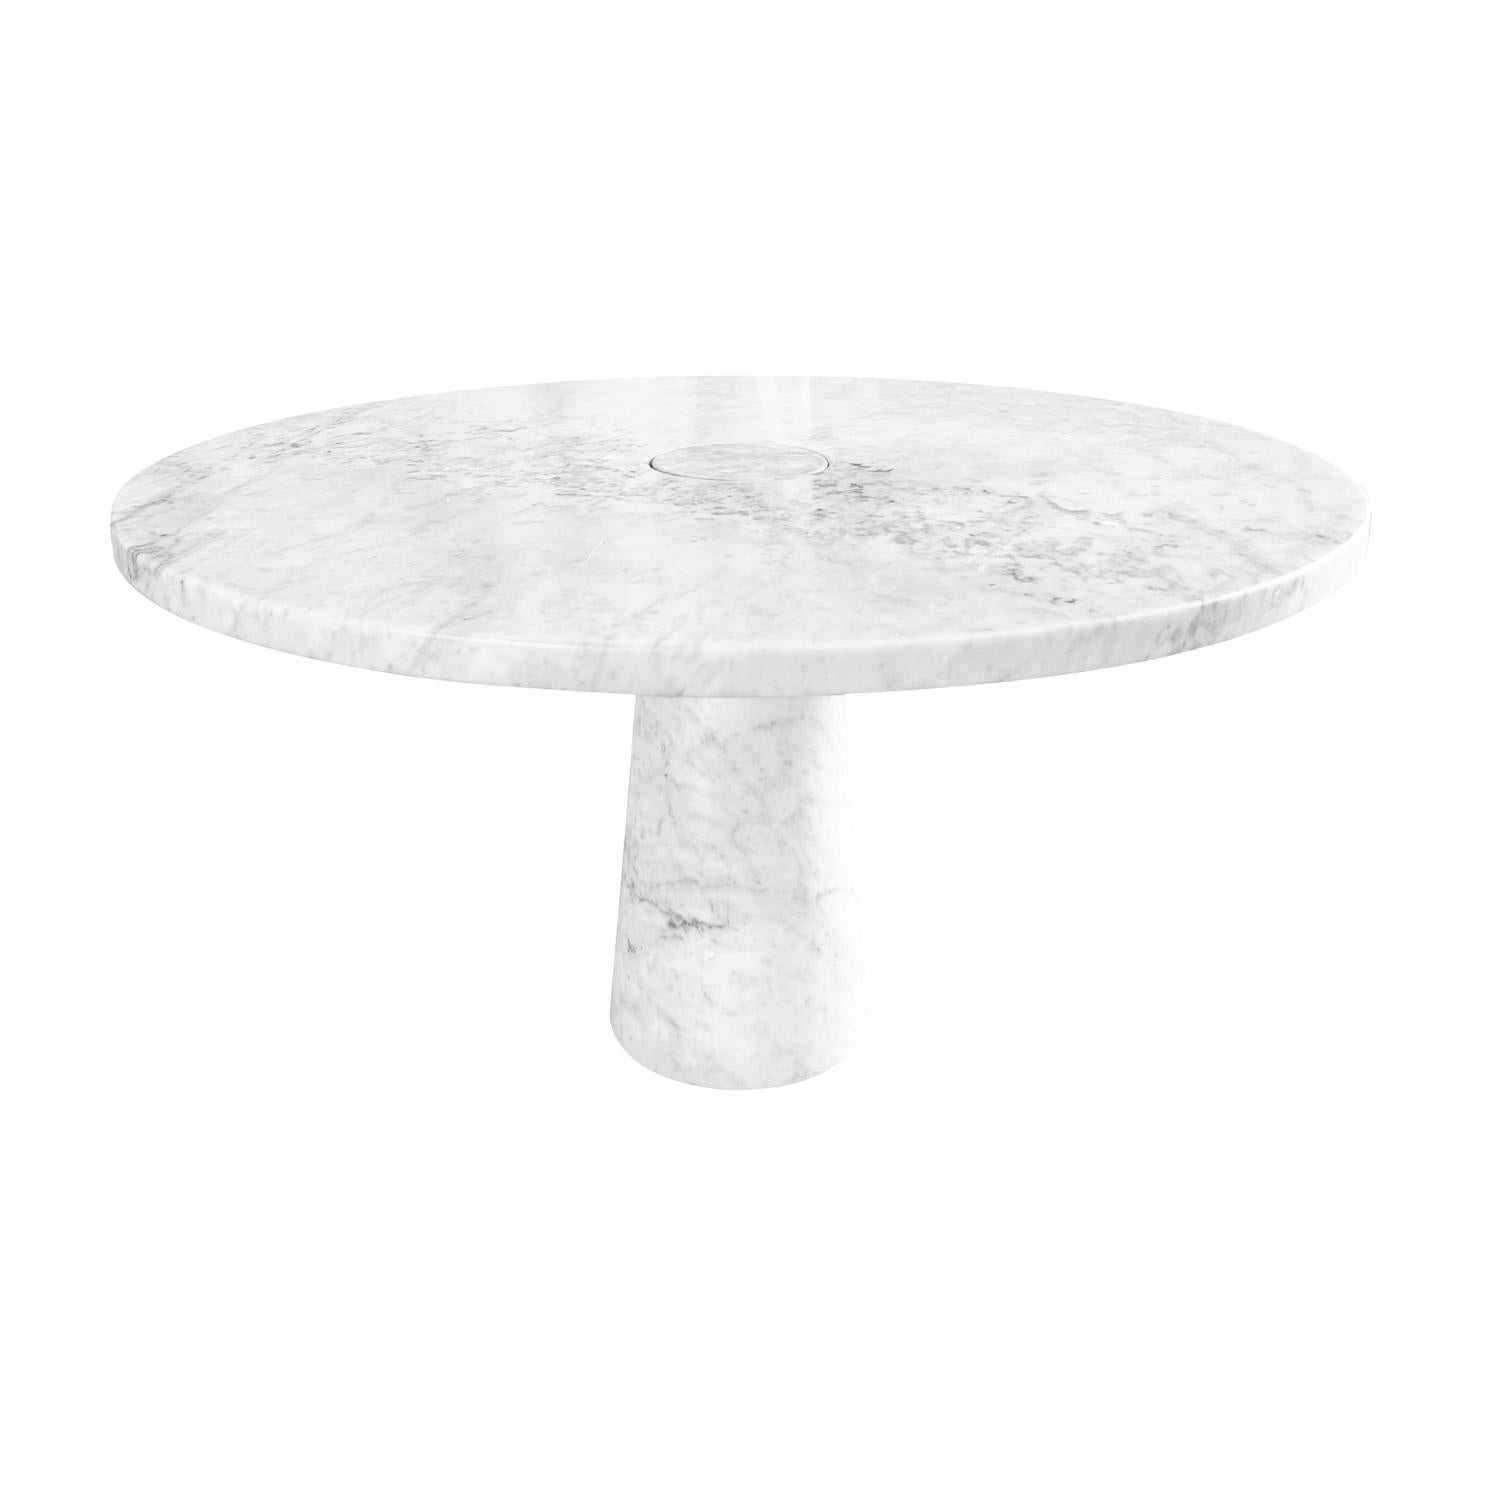 Mid-Century Modern 20th Century Italian Round Marble Dining Table by Angelo Mangiarotti & Skipper For Sale